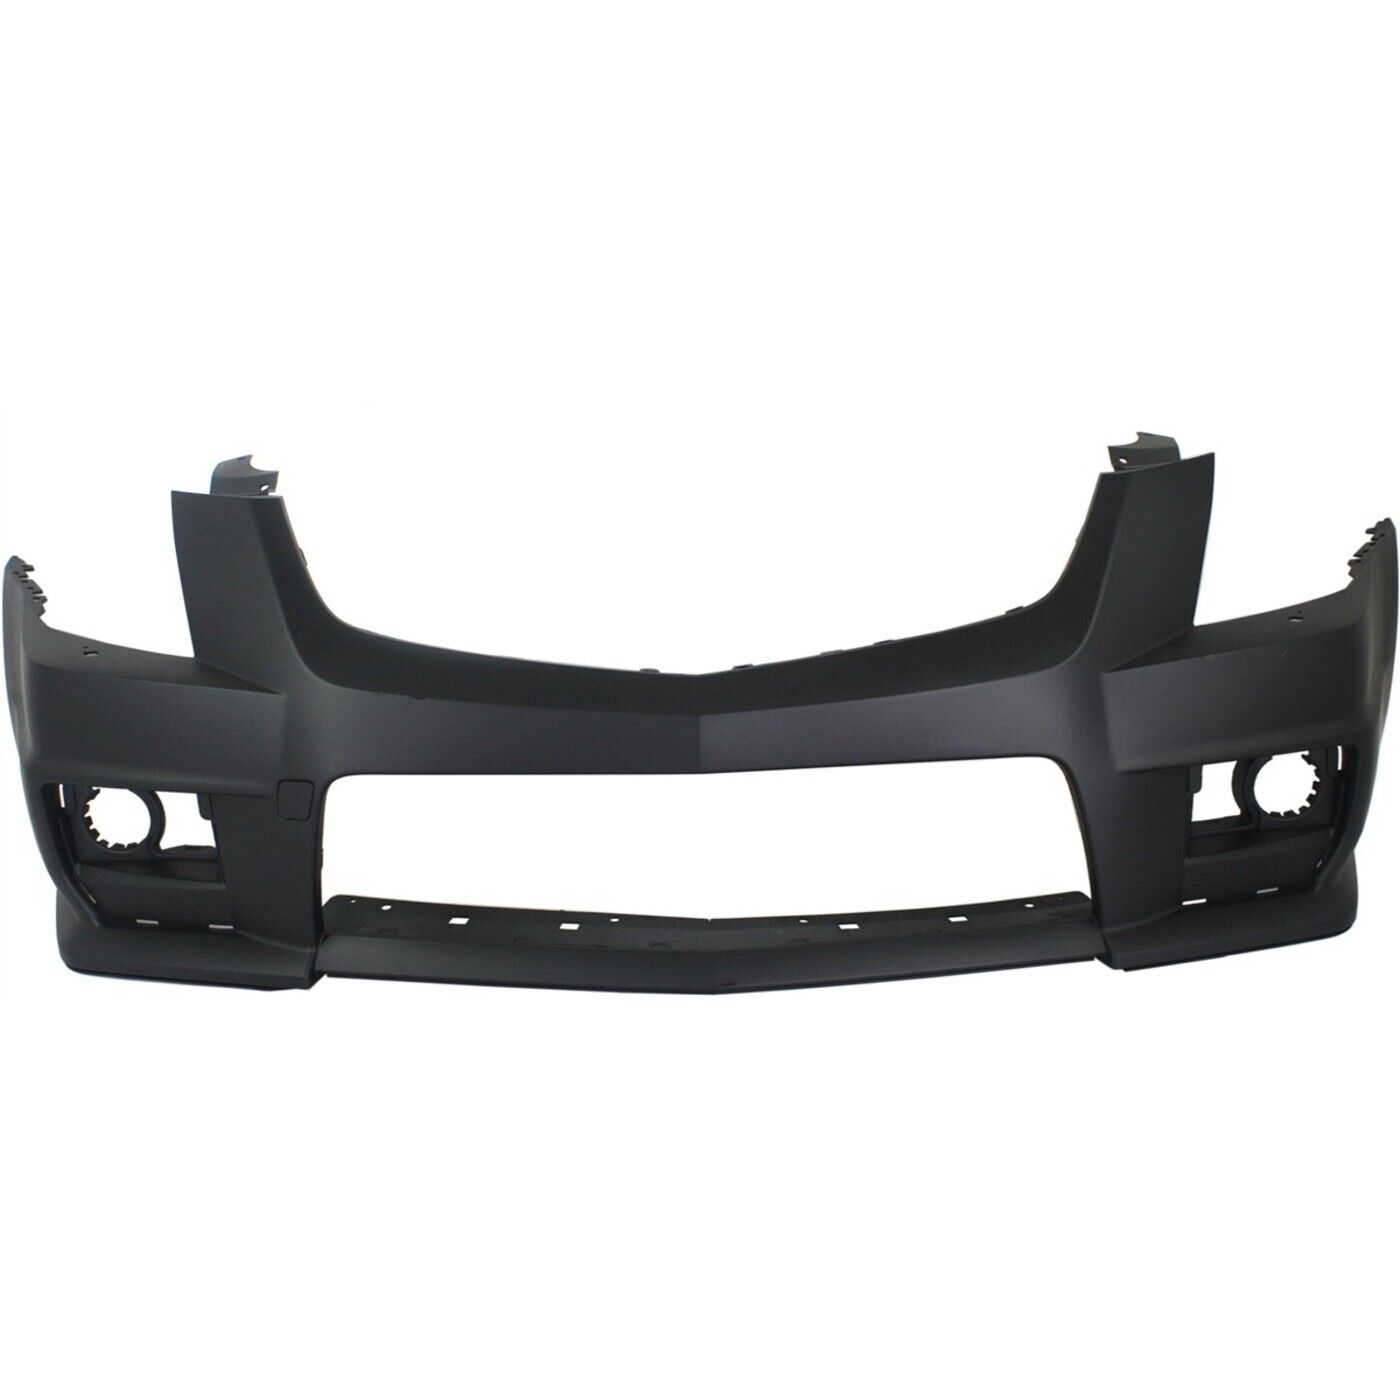 Front Bumper Cover For 2009-2015 Cadillac CTS V Model Primed Plastic CAPA